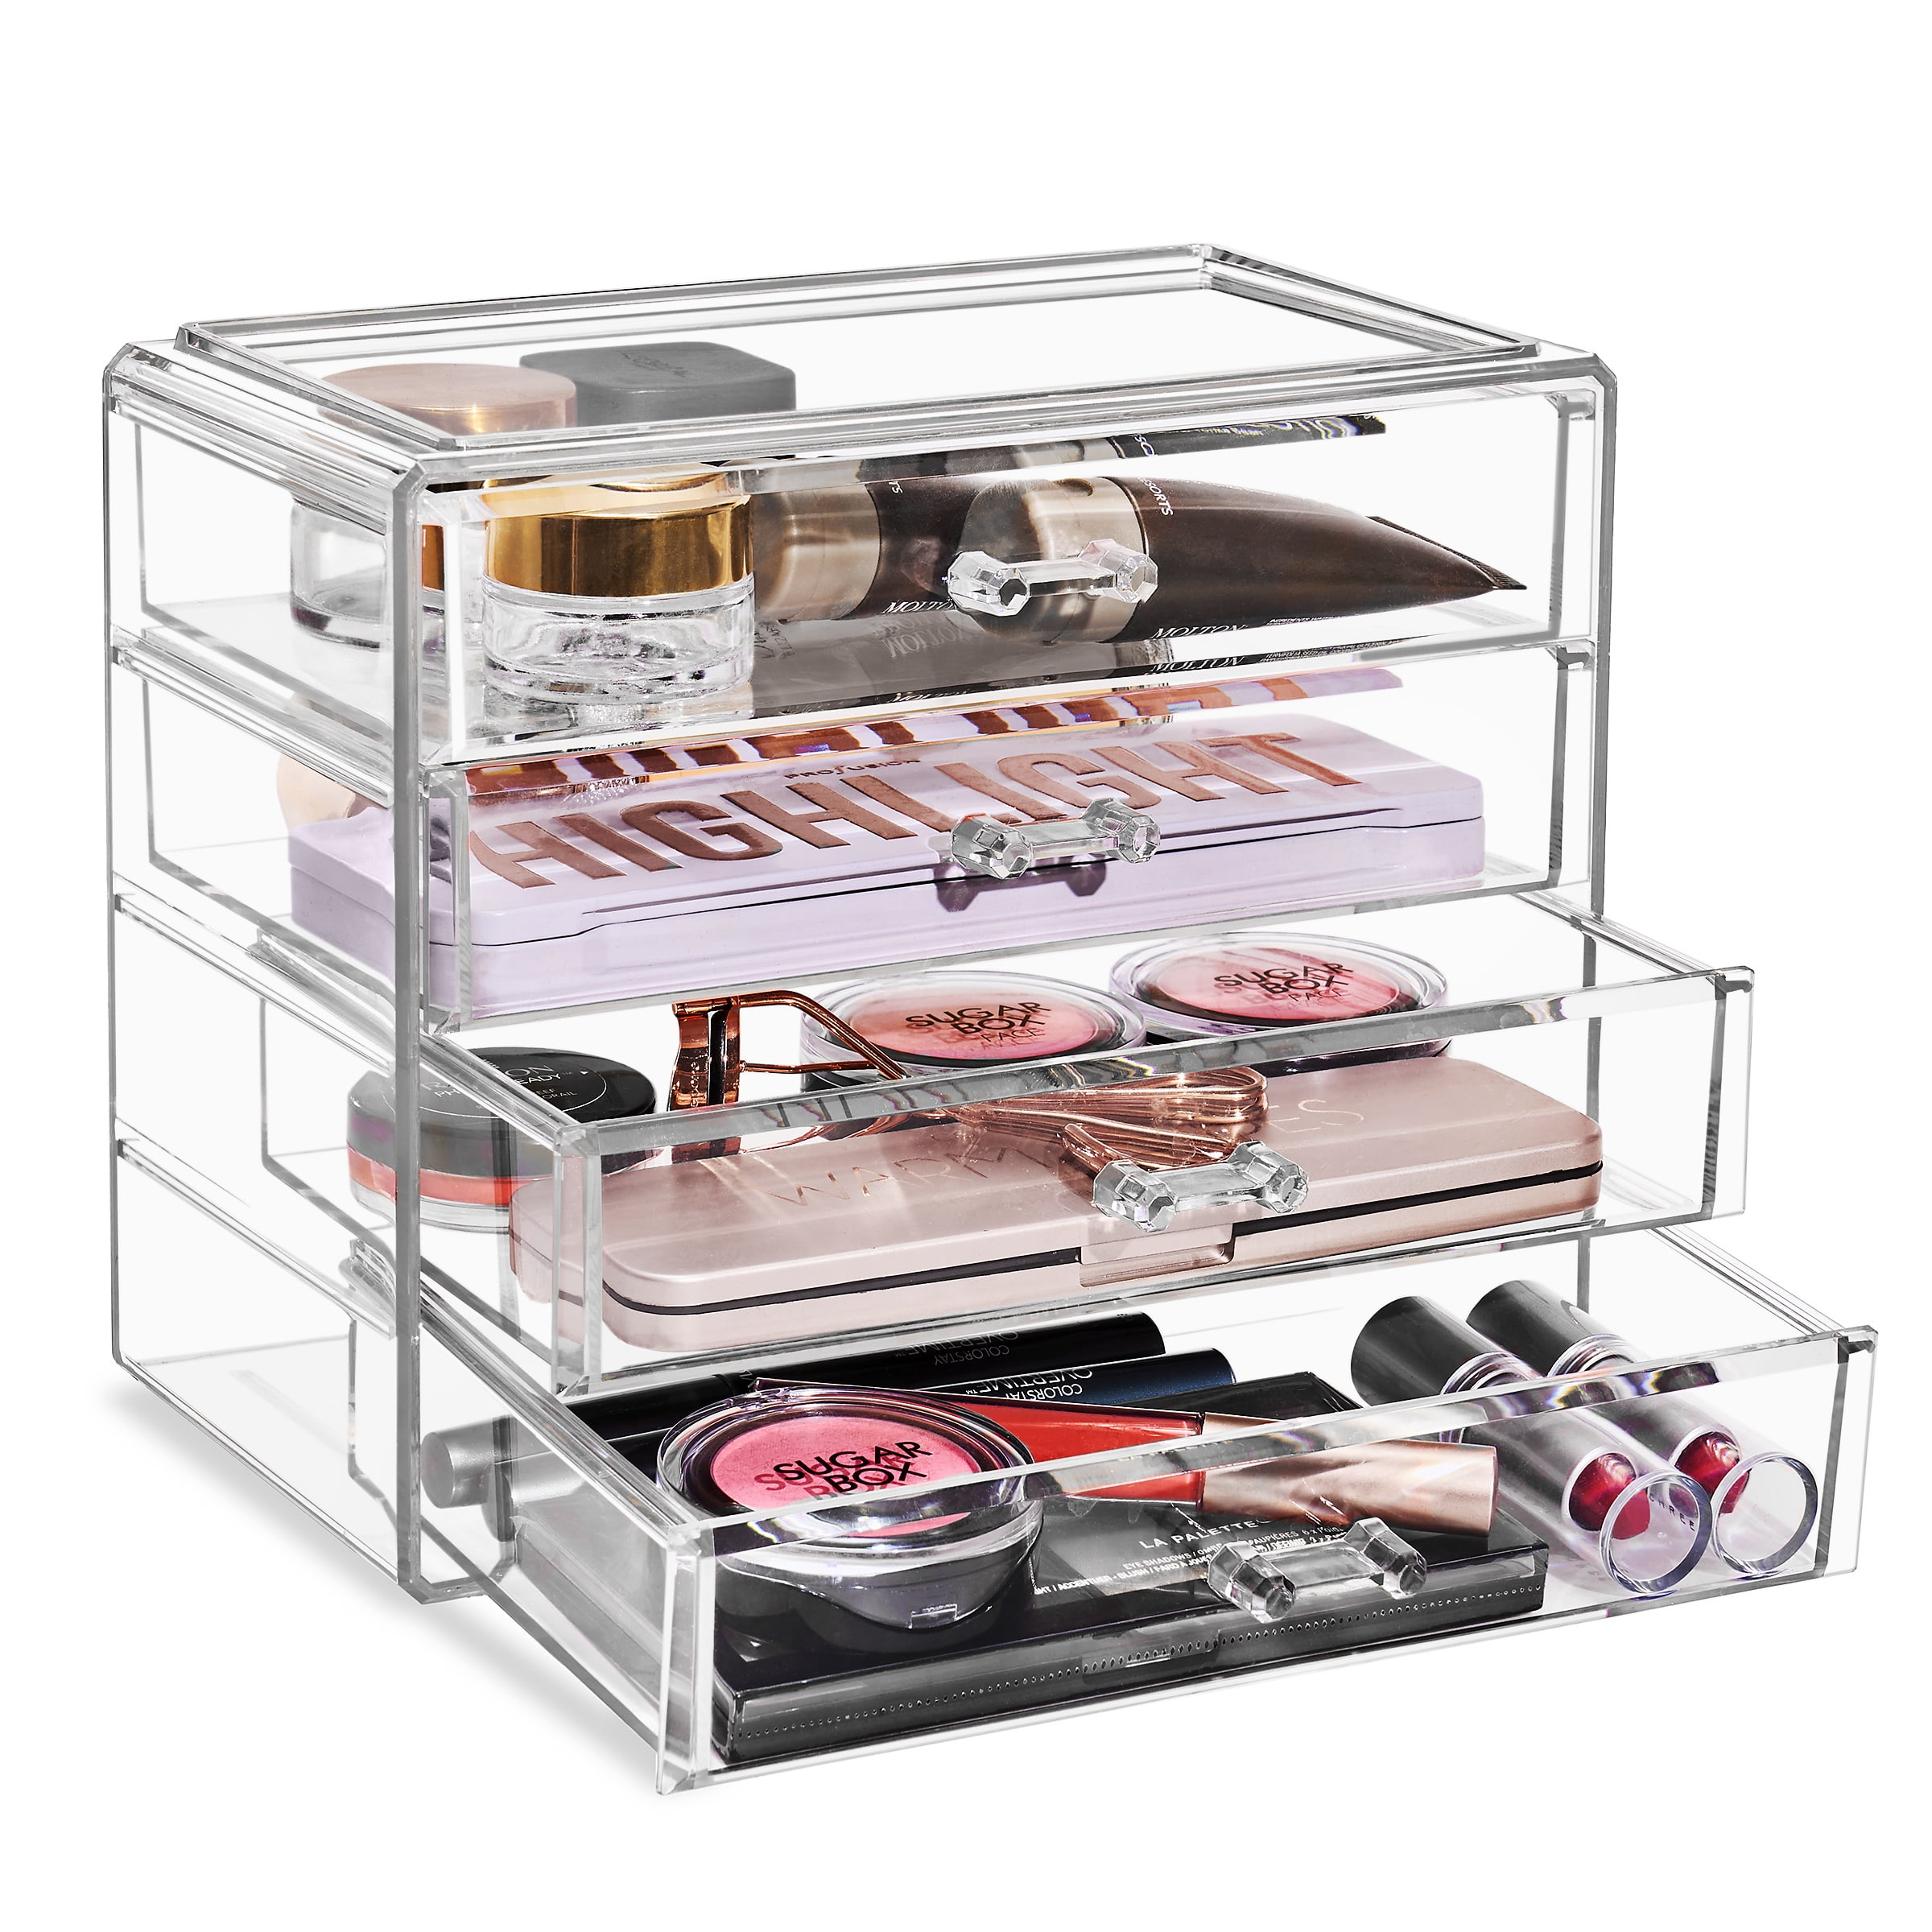 Sorbus Acrylic Cosmetics Makeup and Jewelry Storage Case Display - 4 Drawers -Space- Saving, Stylish Acrylic Bathroom Case Great for Lipstick, Eye Liner, Nail Polish, Brushes, Jewelry and More - Walmart.com